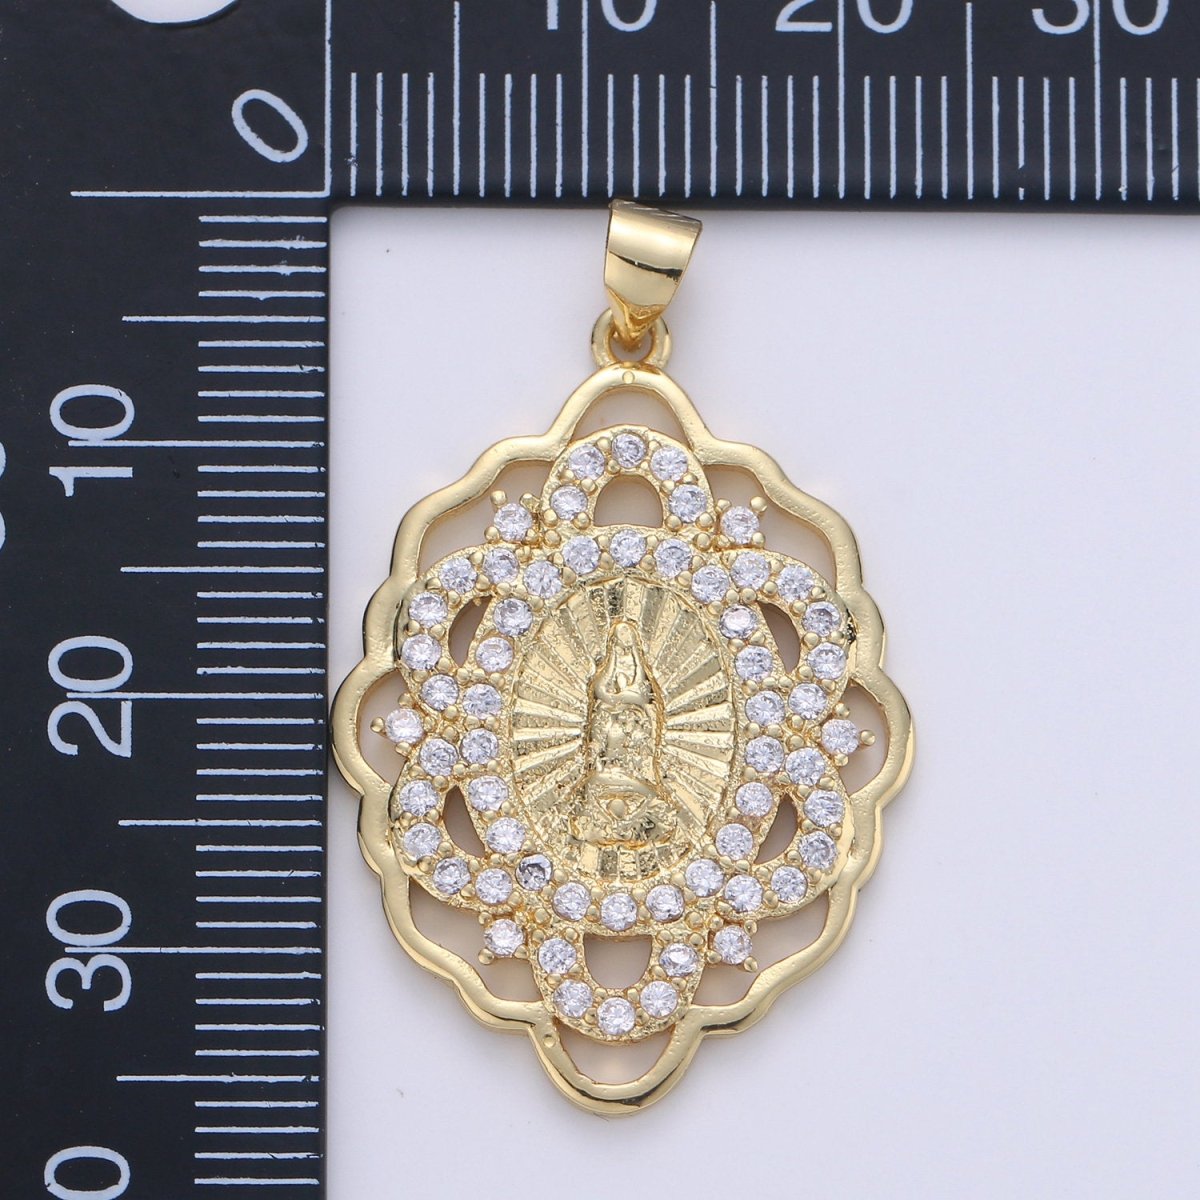 Gold Medallion Virgin Mary Pendant Sun Burst Pendant Round Coin Pendant in 24K Gold Filled Religious Jewelry Charm Pendant for Necklace I-640 - DLUXCA